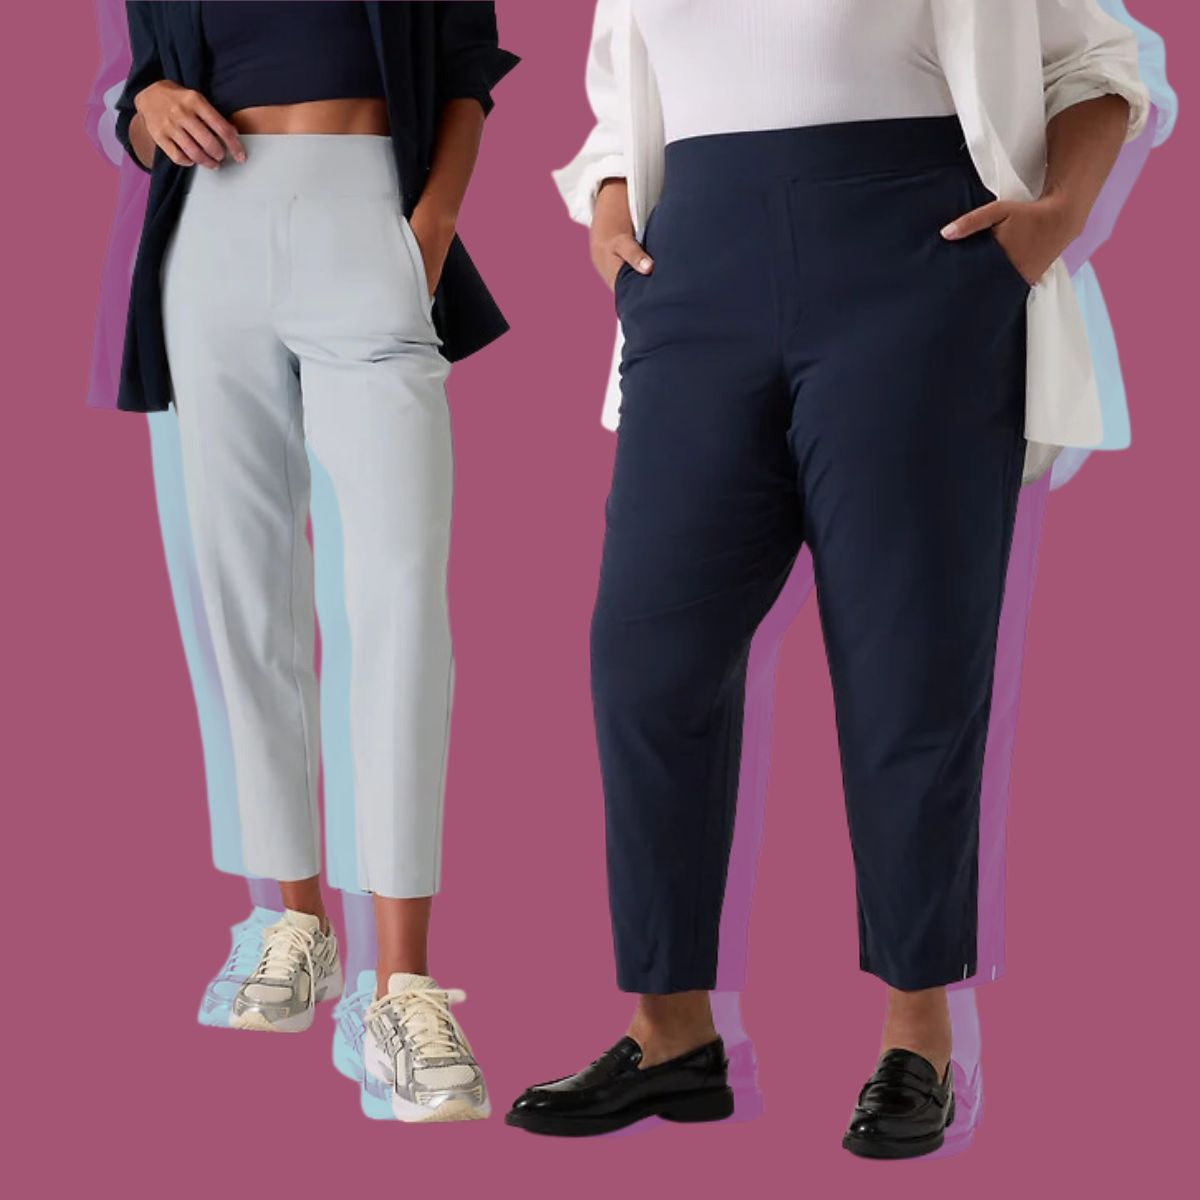 Fashion Look Featuring Athleta Pants and Athleta Activewear Tops by  WhatToWearco - ShopStyle